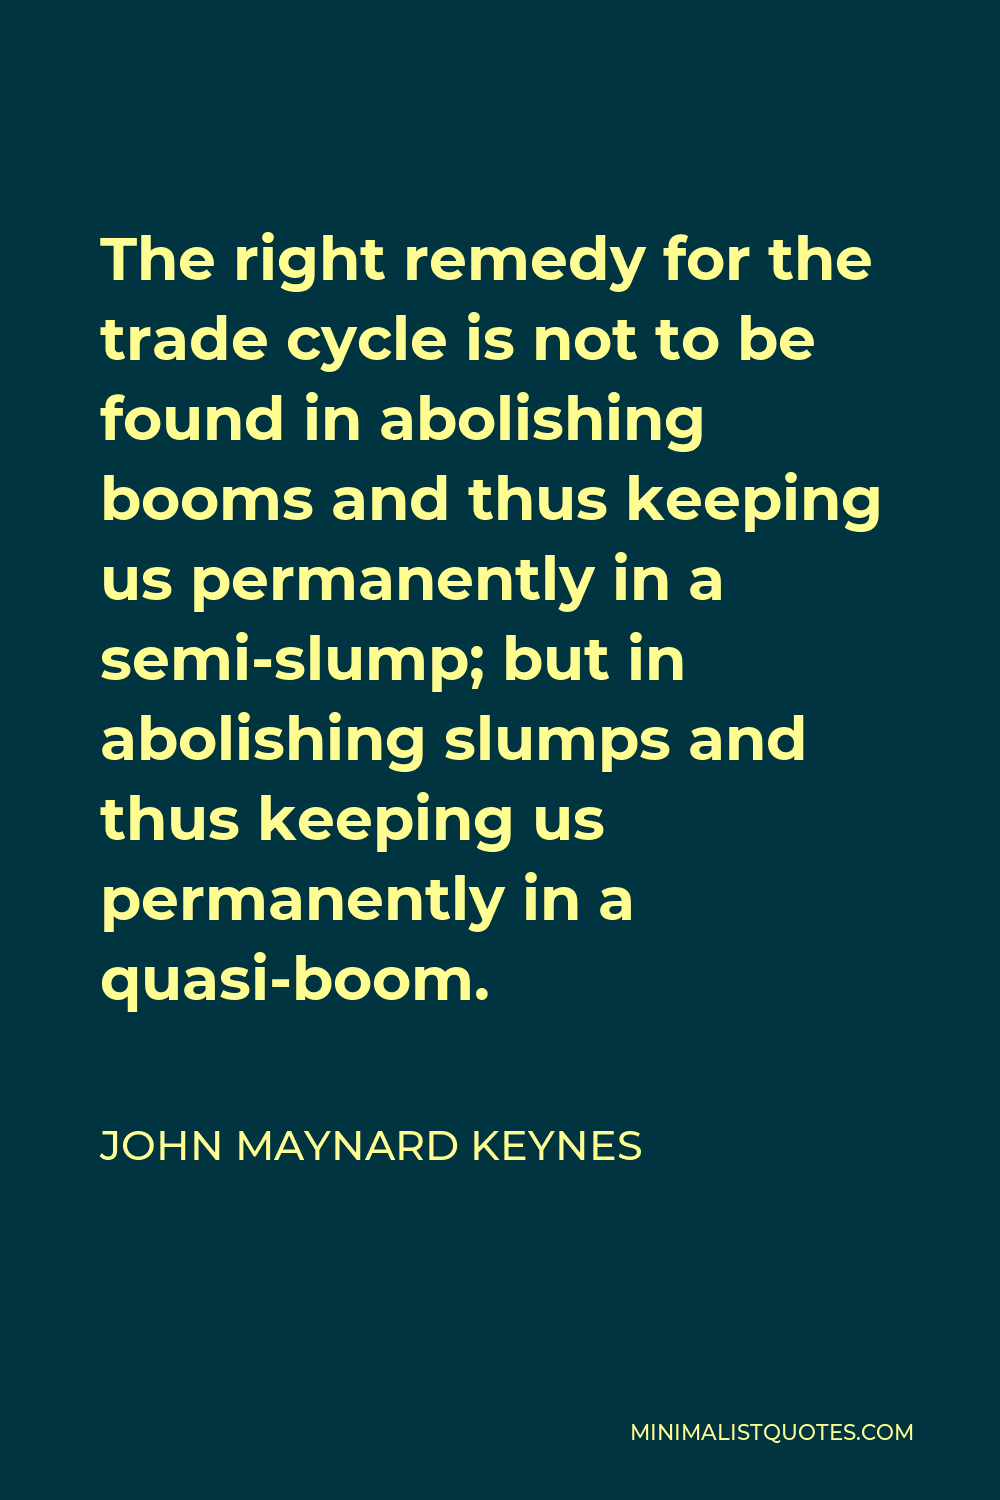 John Maynard Keynes Quote - The right remedy for the trade cycle is not to be found in abolishing booms and thus keeping us permanently in a semi-slump; but in abolishing slumps and thus keeping us permanently in a quasi-boom.